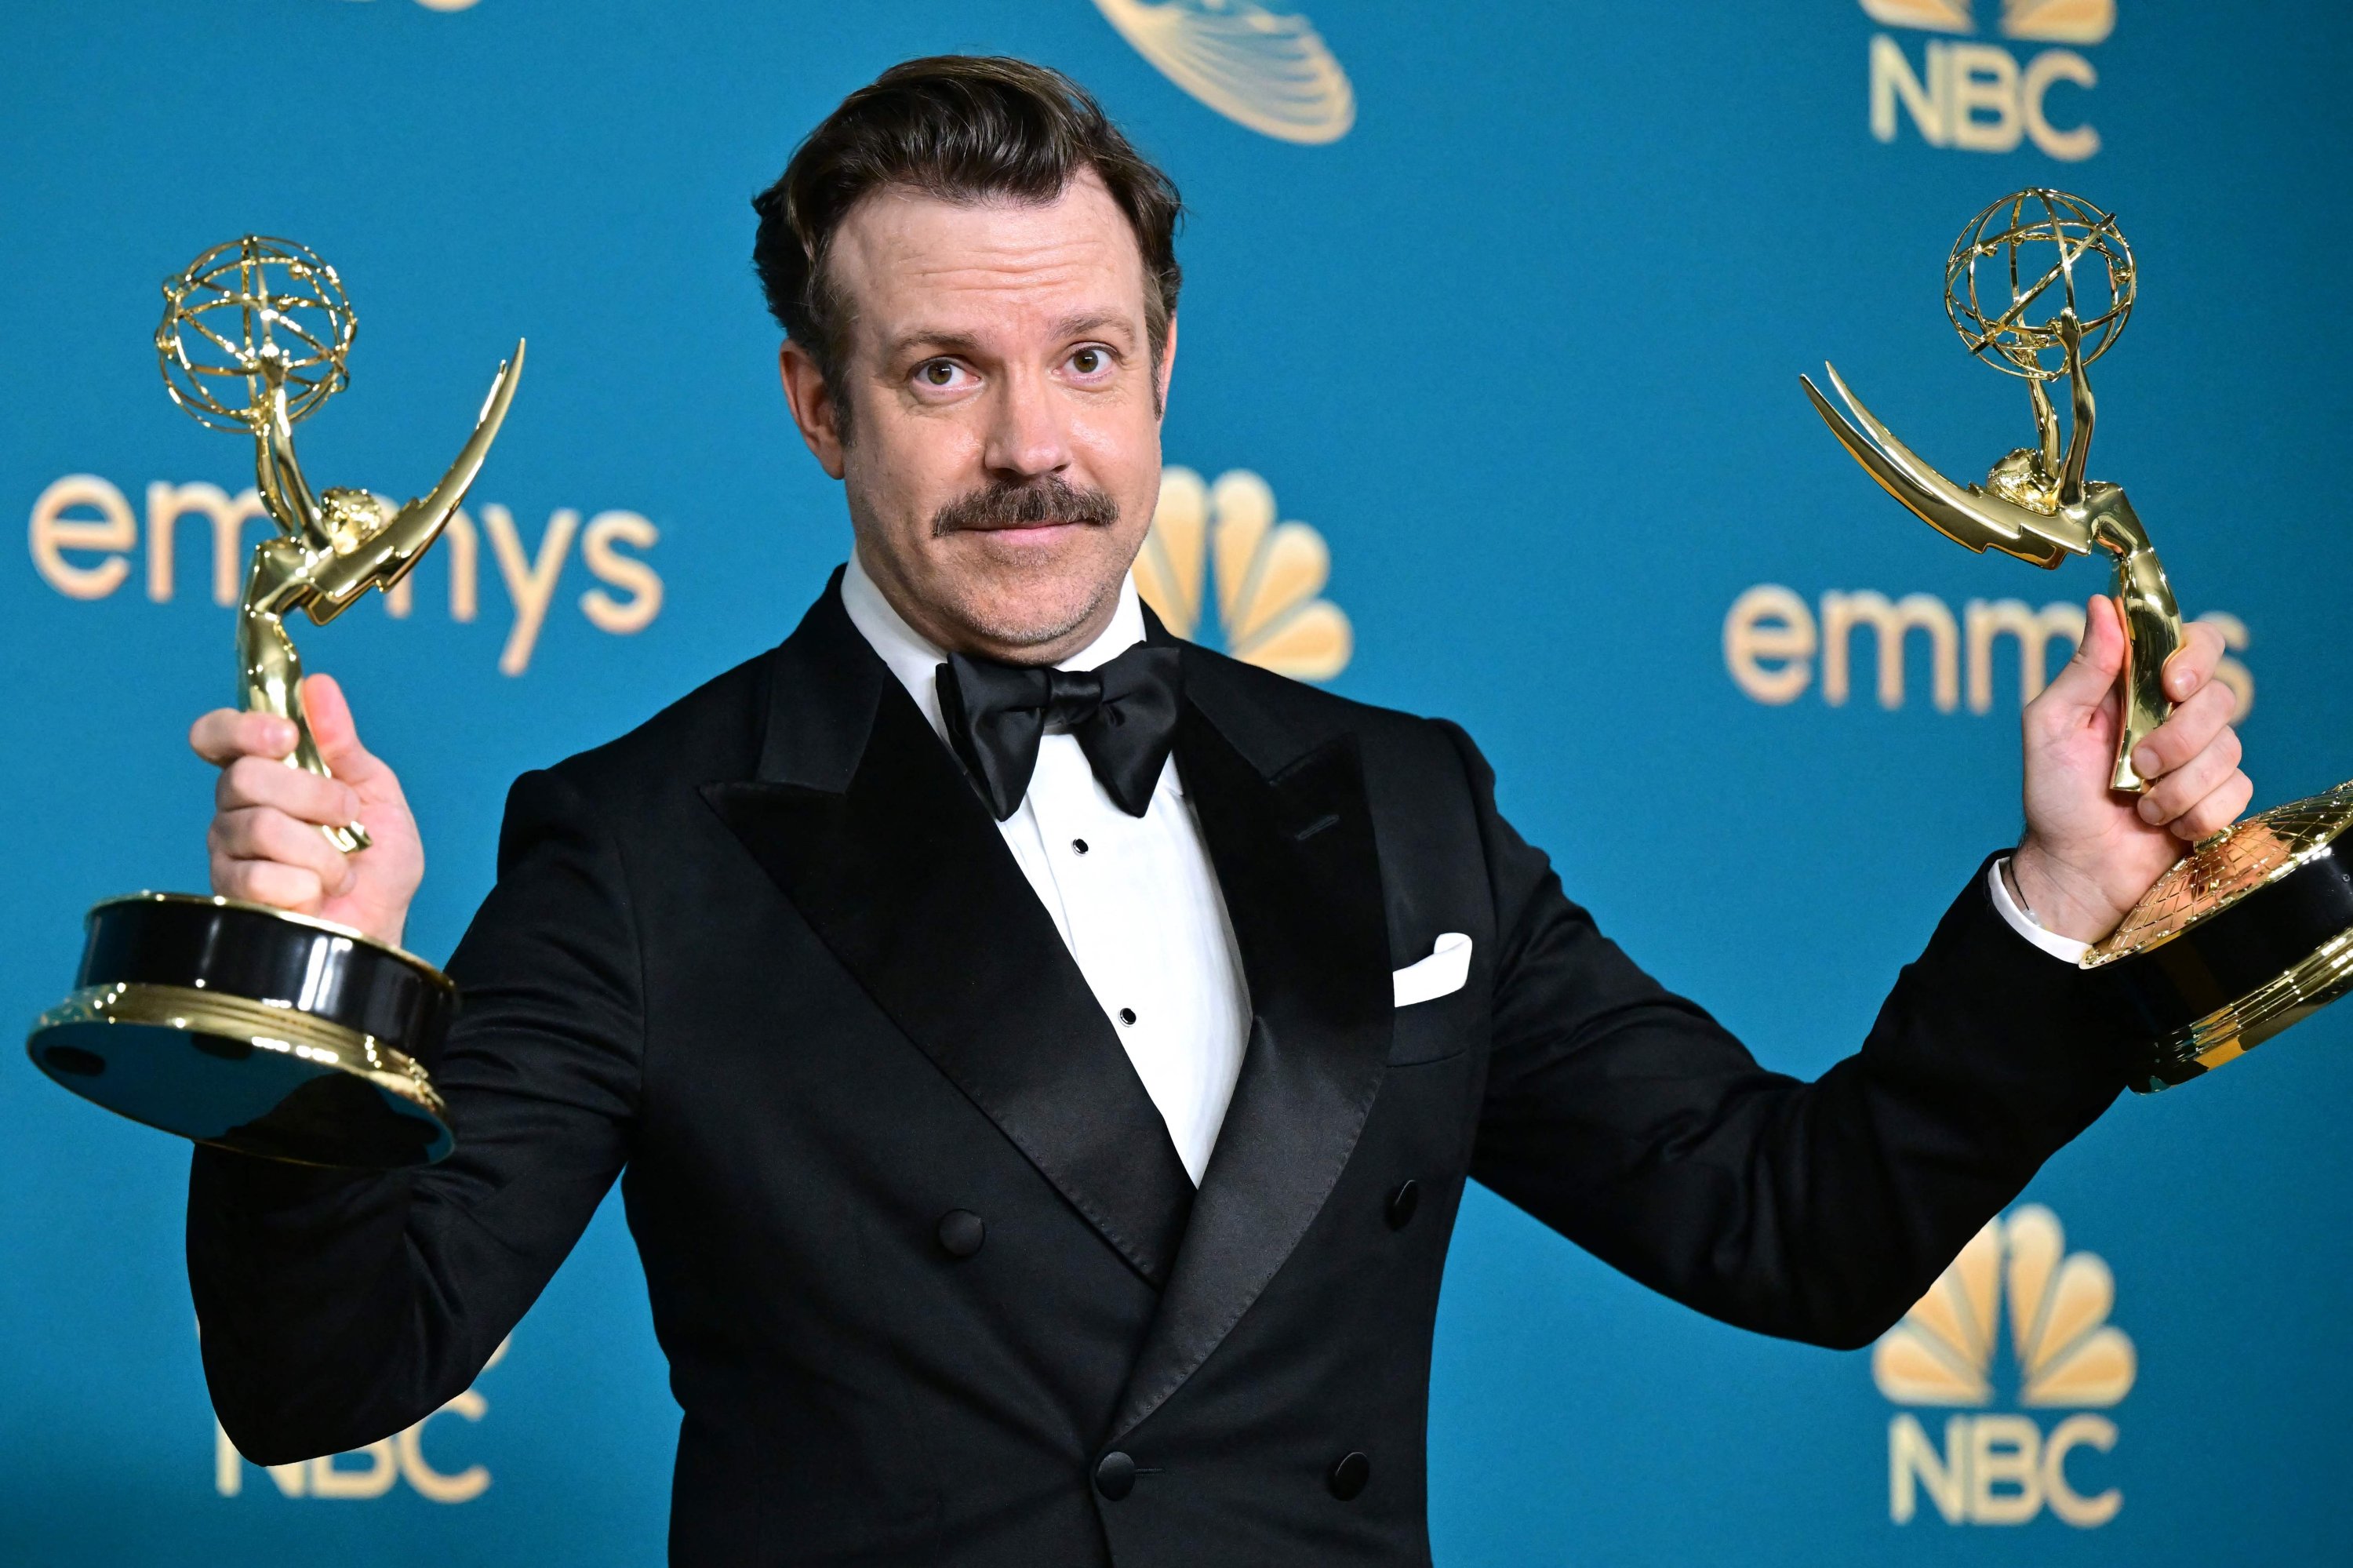 U.S. actor Jason Sudeikis poses with the awards for Outstanding Comedy Series and Outstanding Lead Actor In A Comedy Series for "Ted Lasso" during the 74th Emmy Awards at the Microsoft Theater in Los Angeles, California, U.S., Sept. 12, 2022. (AFP Photo)